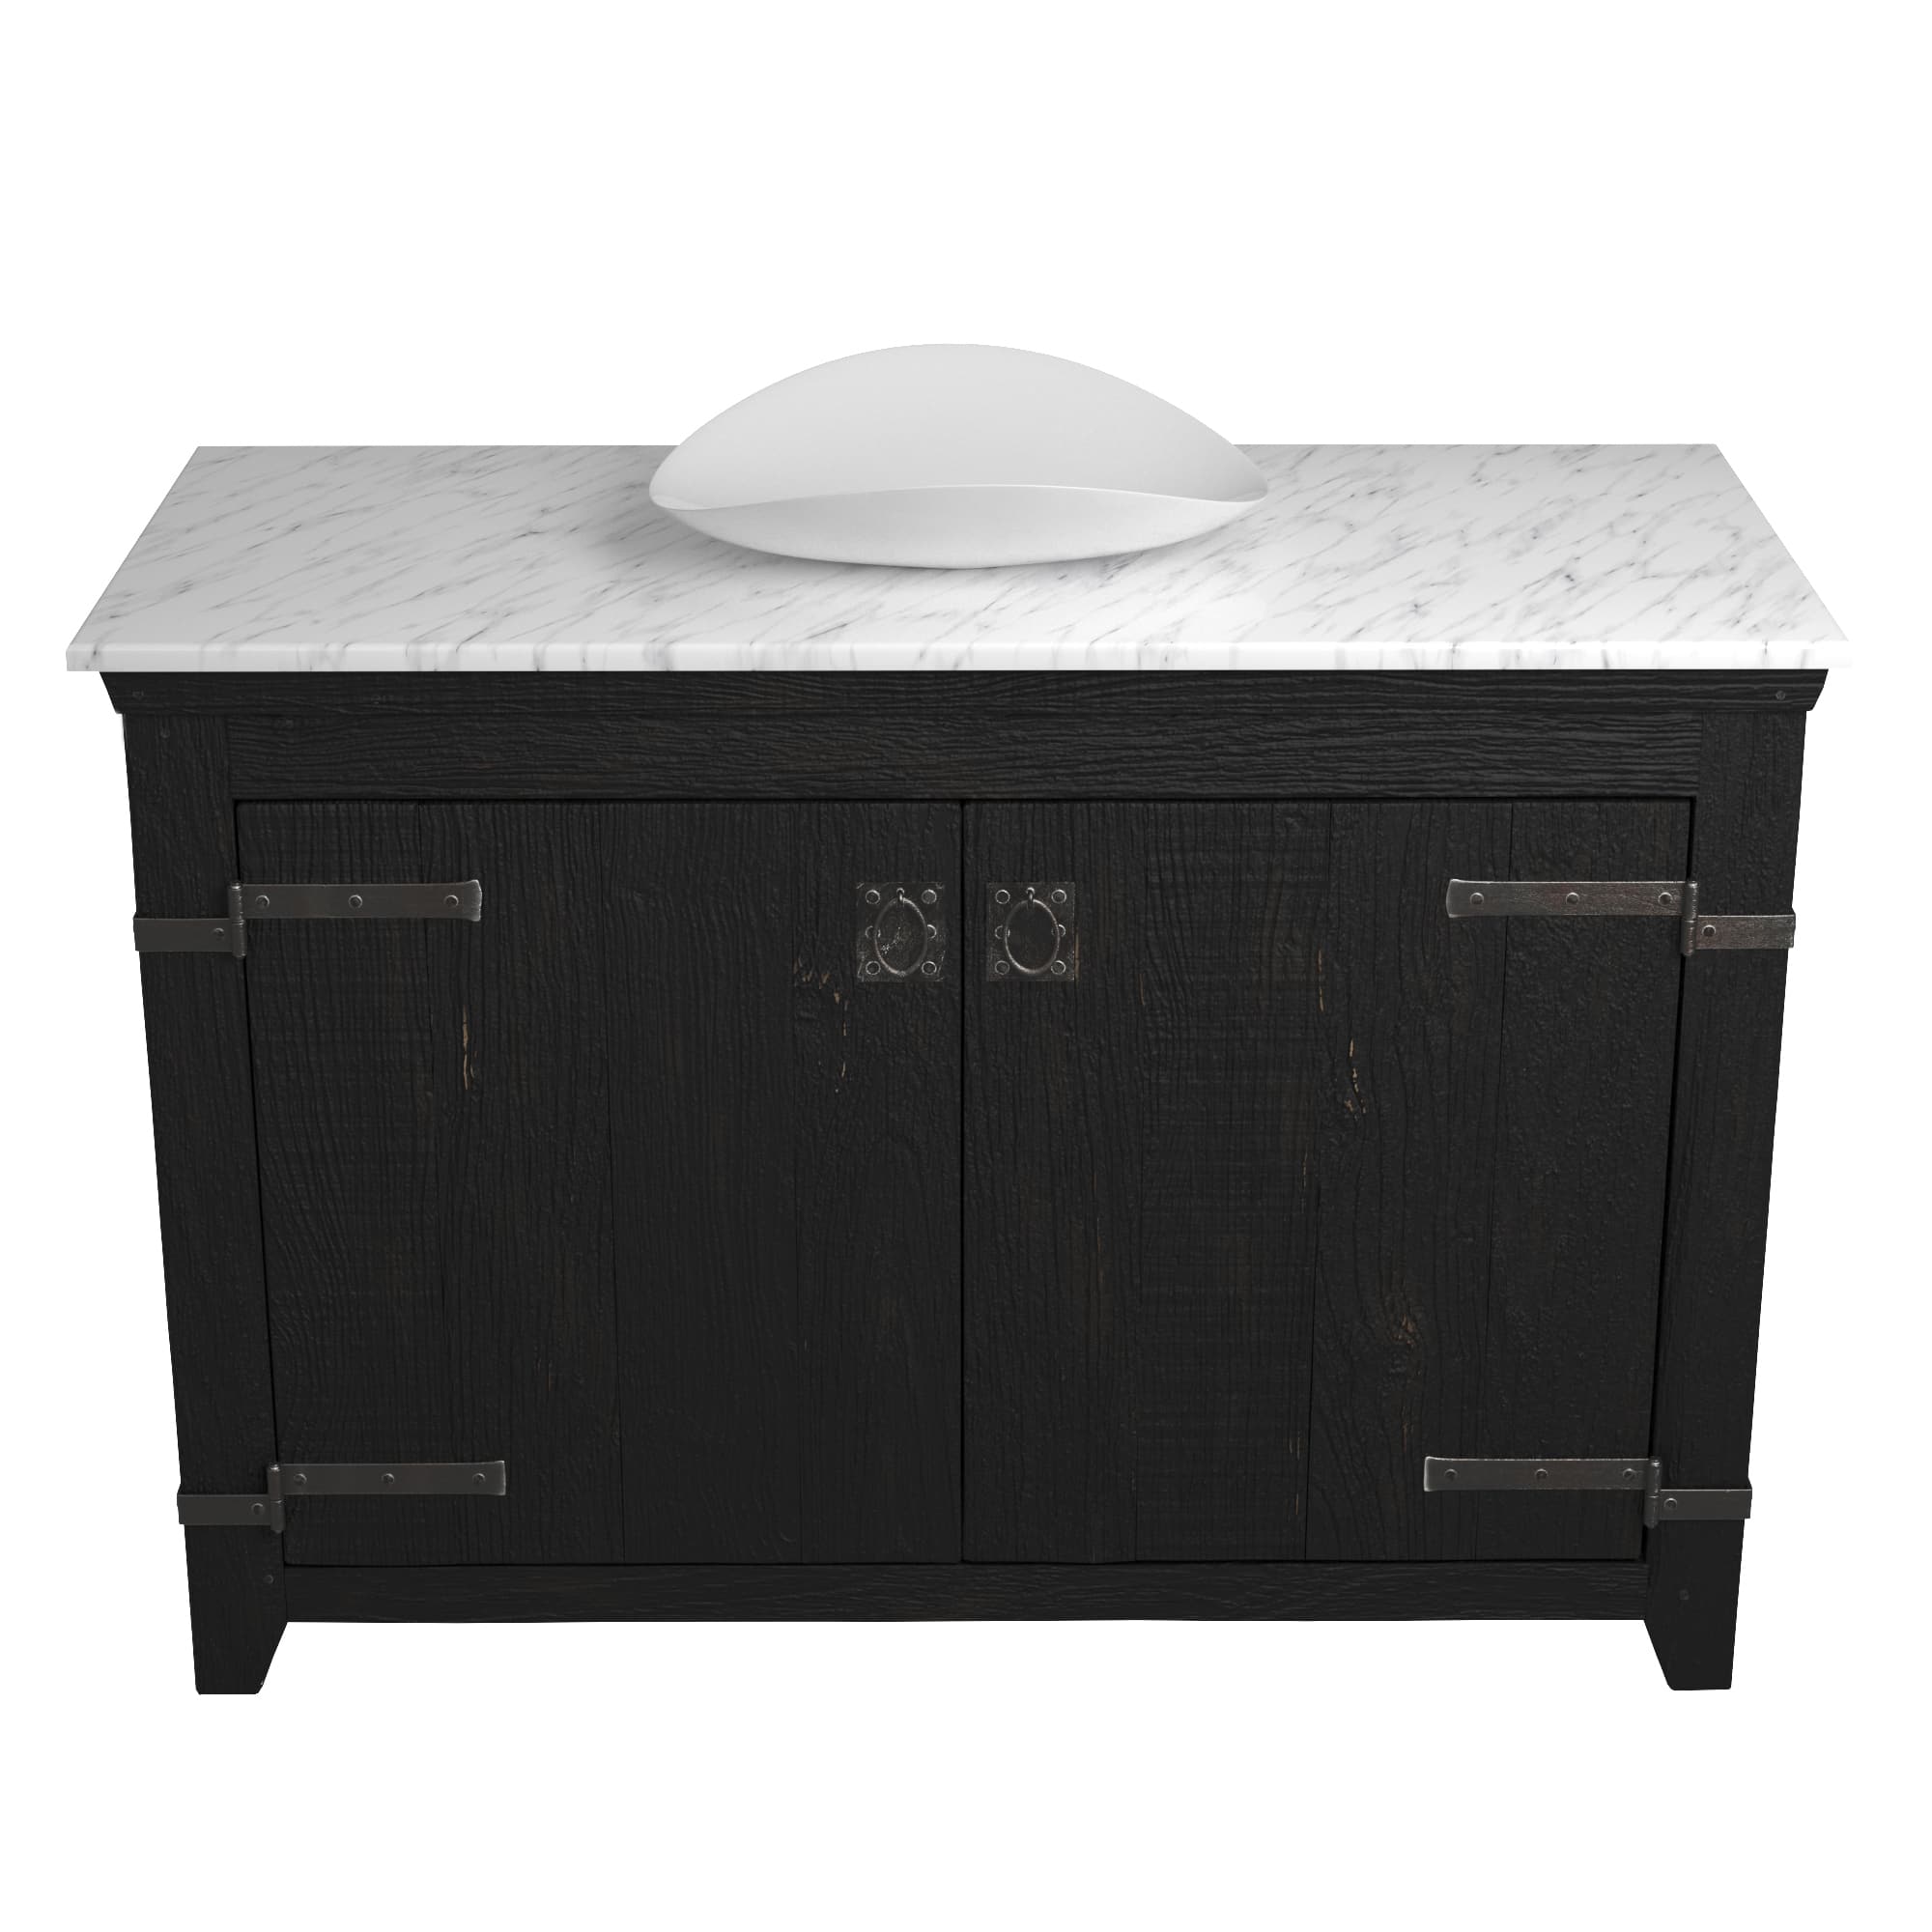 Native Trails 48" Americana Vanity in Anvil with Carrara Marble Top and Sorrento in Bianco, No Faucet Hole, BND48-VB-CT-MG-102